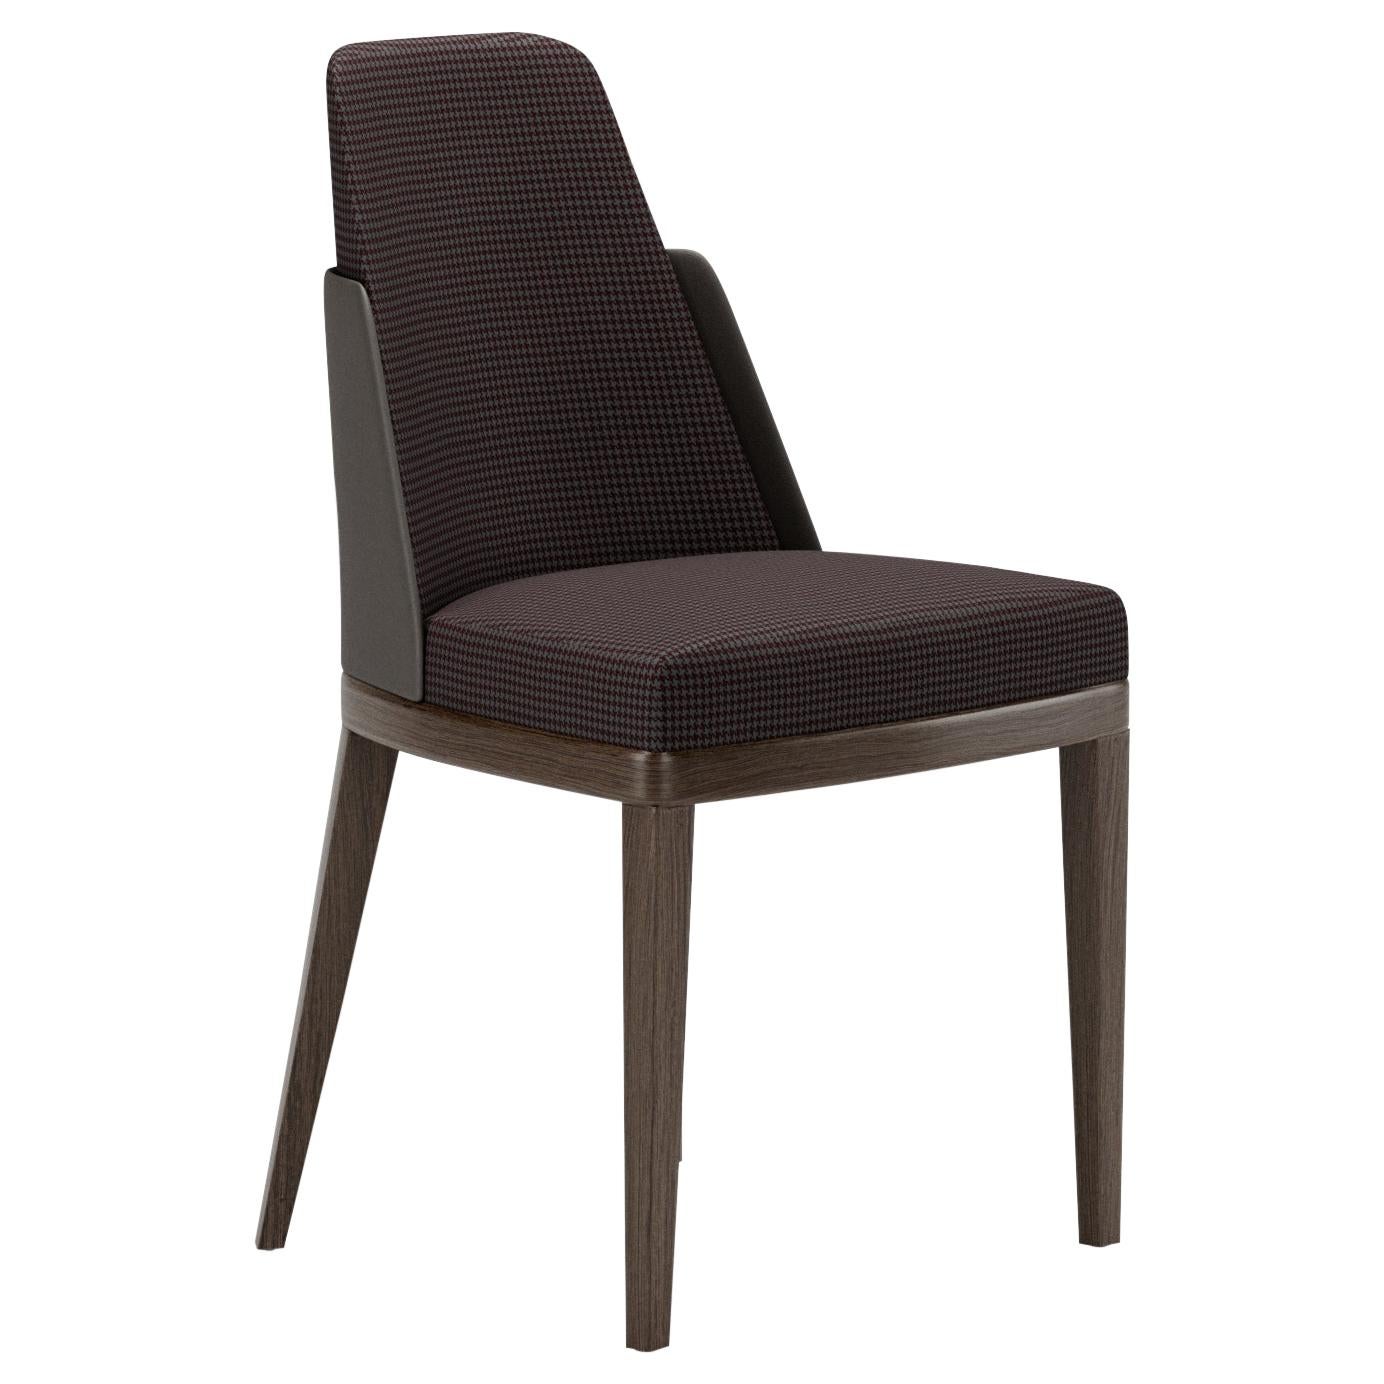 Contemporary Dining Chair Leather Shell Fabric Interior Backrest and Seat For Sale